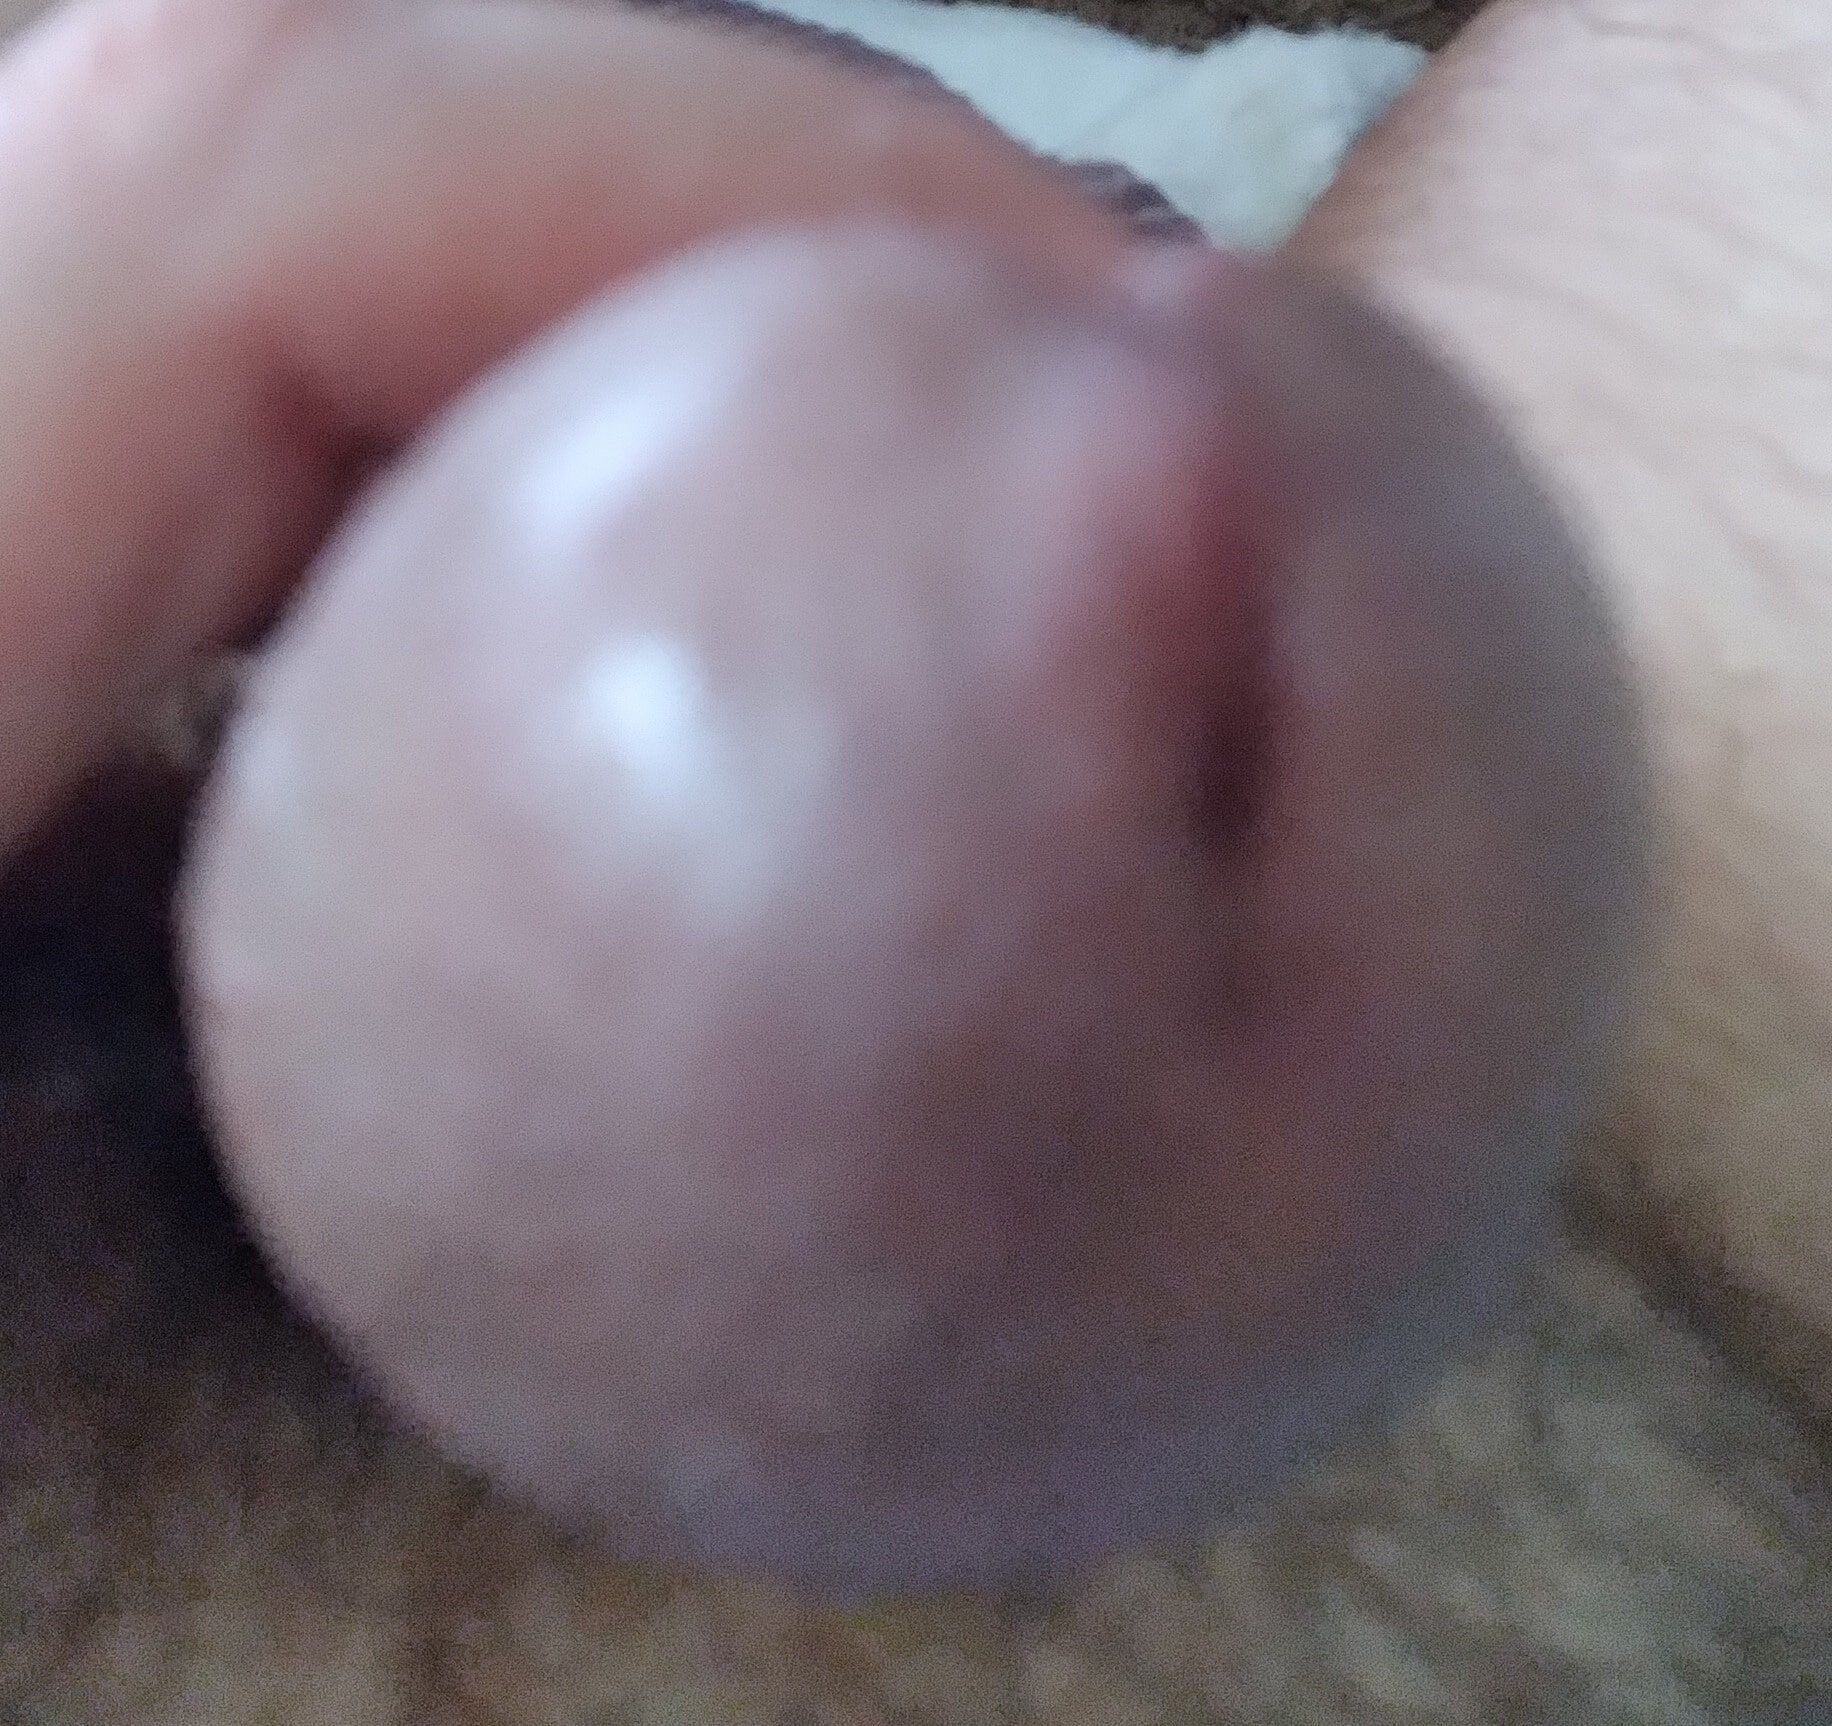 New cock ring #4